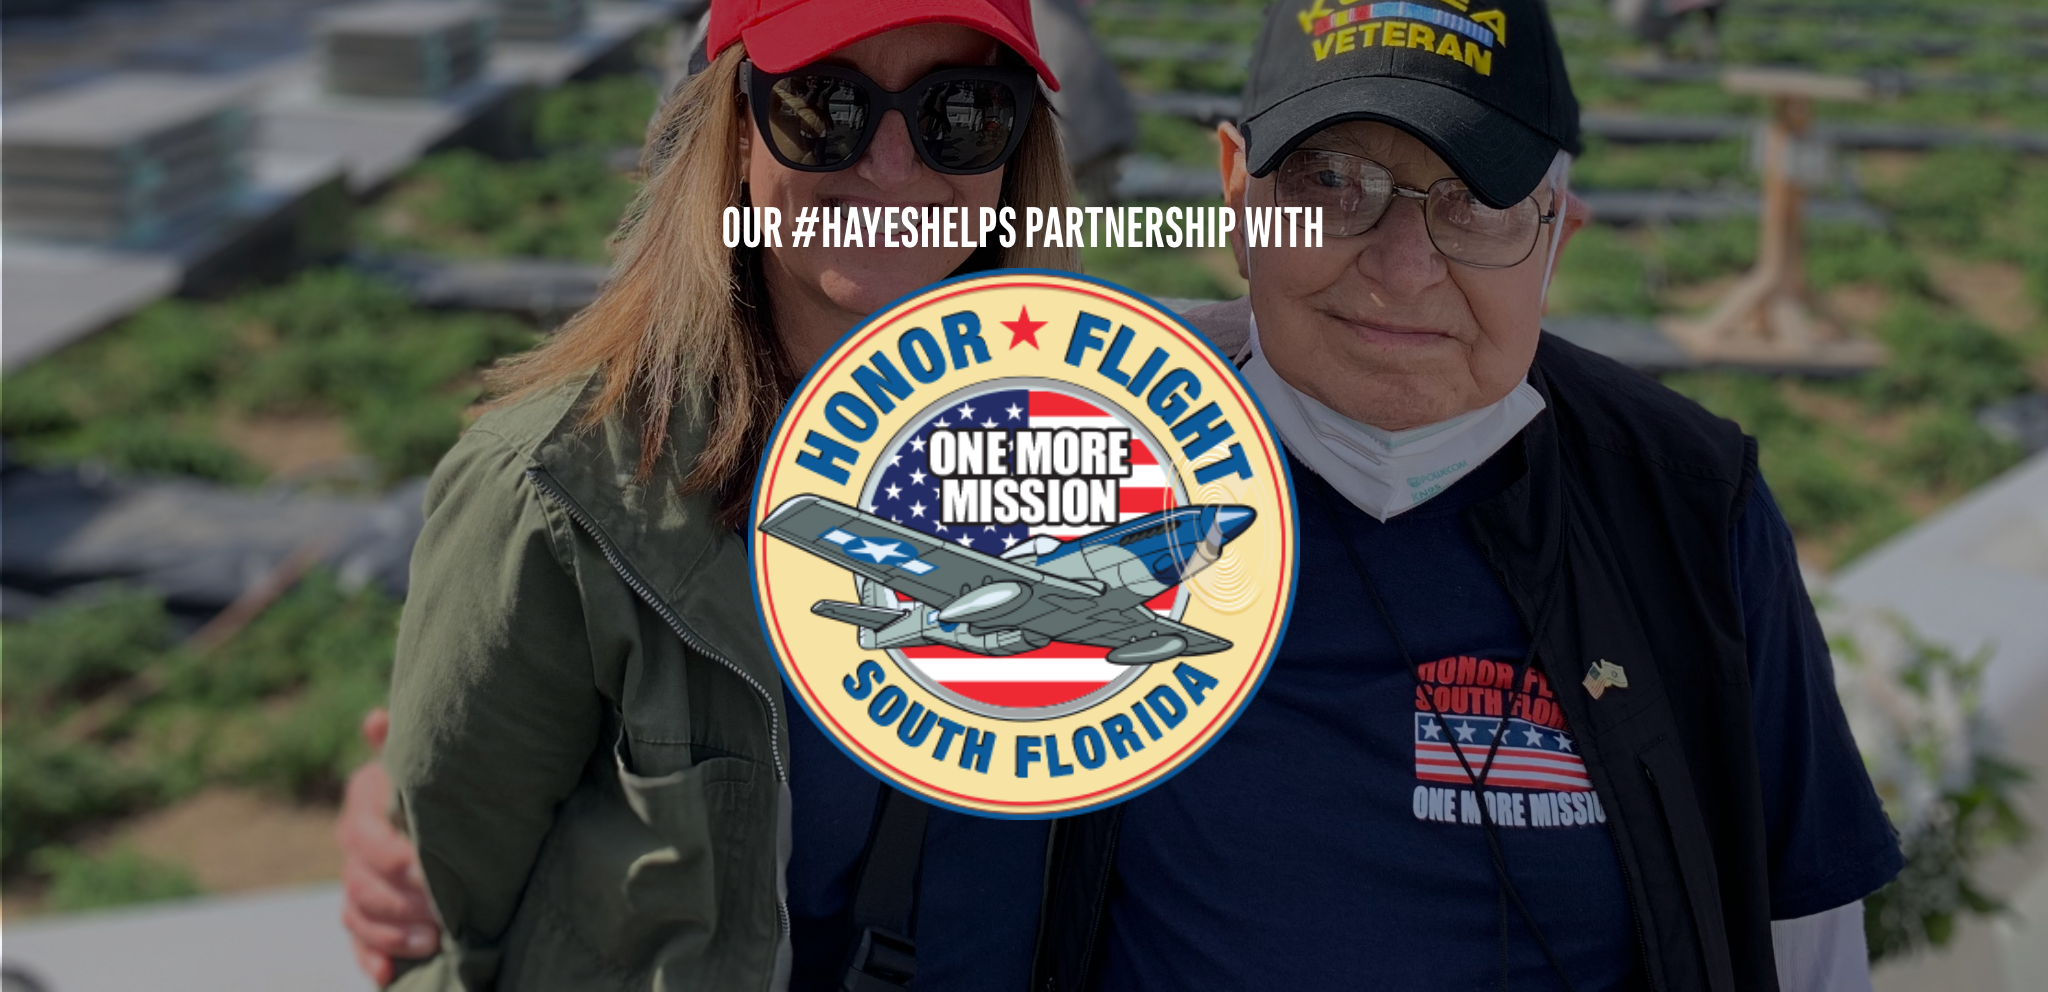 Our Hayes Helps partnership with Honor Flight South Florida